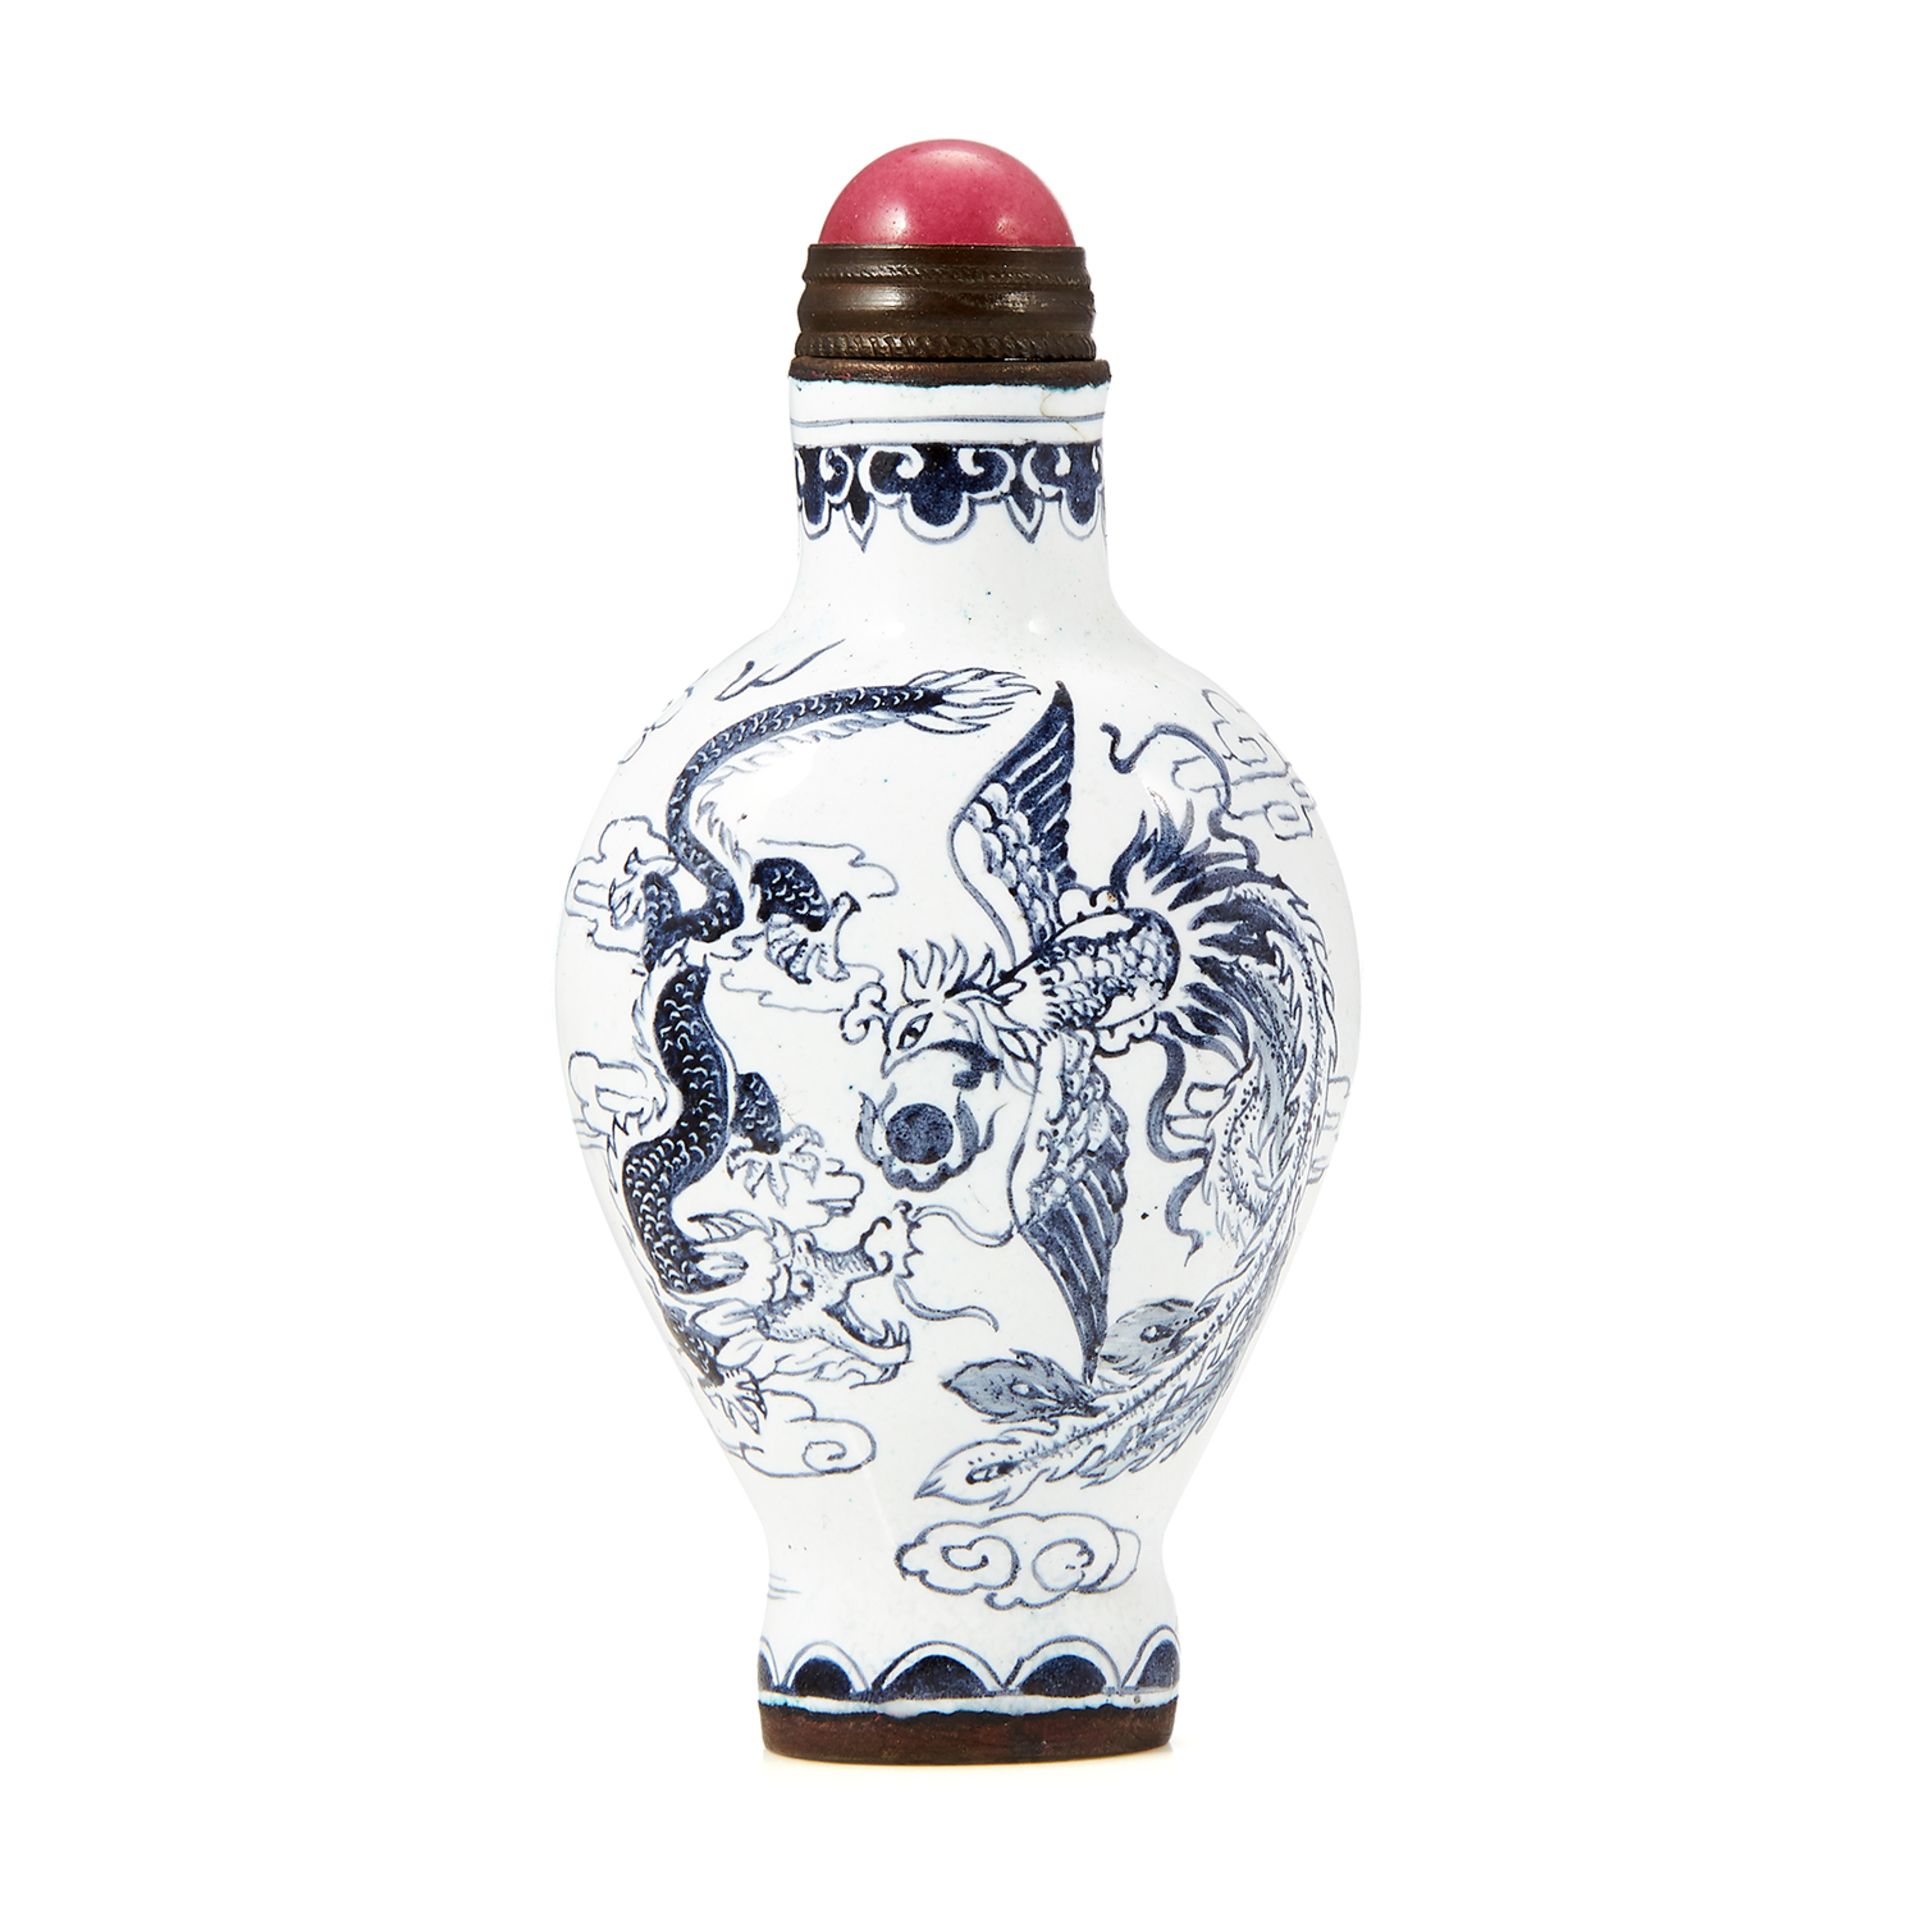 AN ANTIQUE CHINESE PAINTED BRONZE SNUFF BOTTLE with blue and white scenes depicting dragons, 8.6cm.